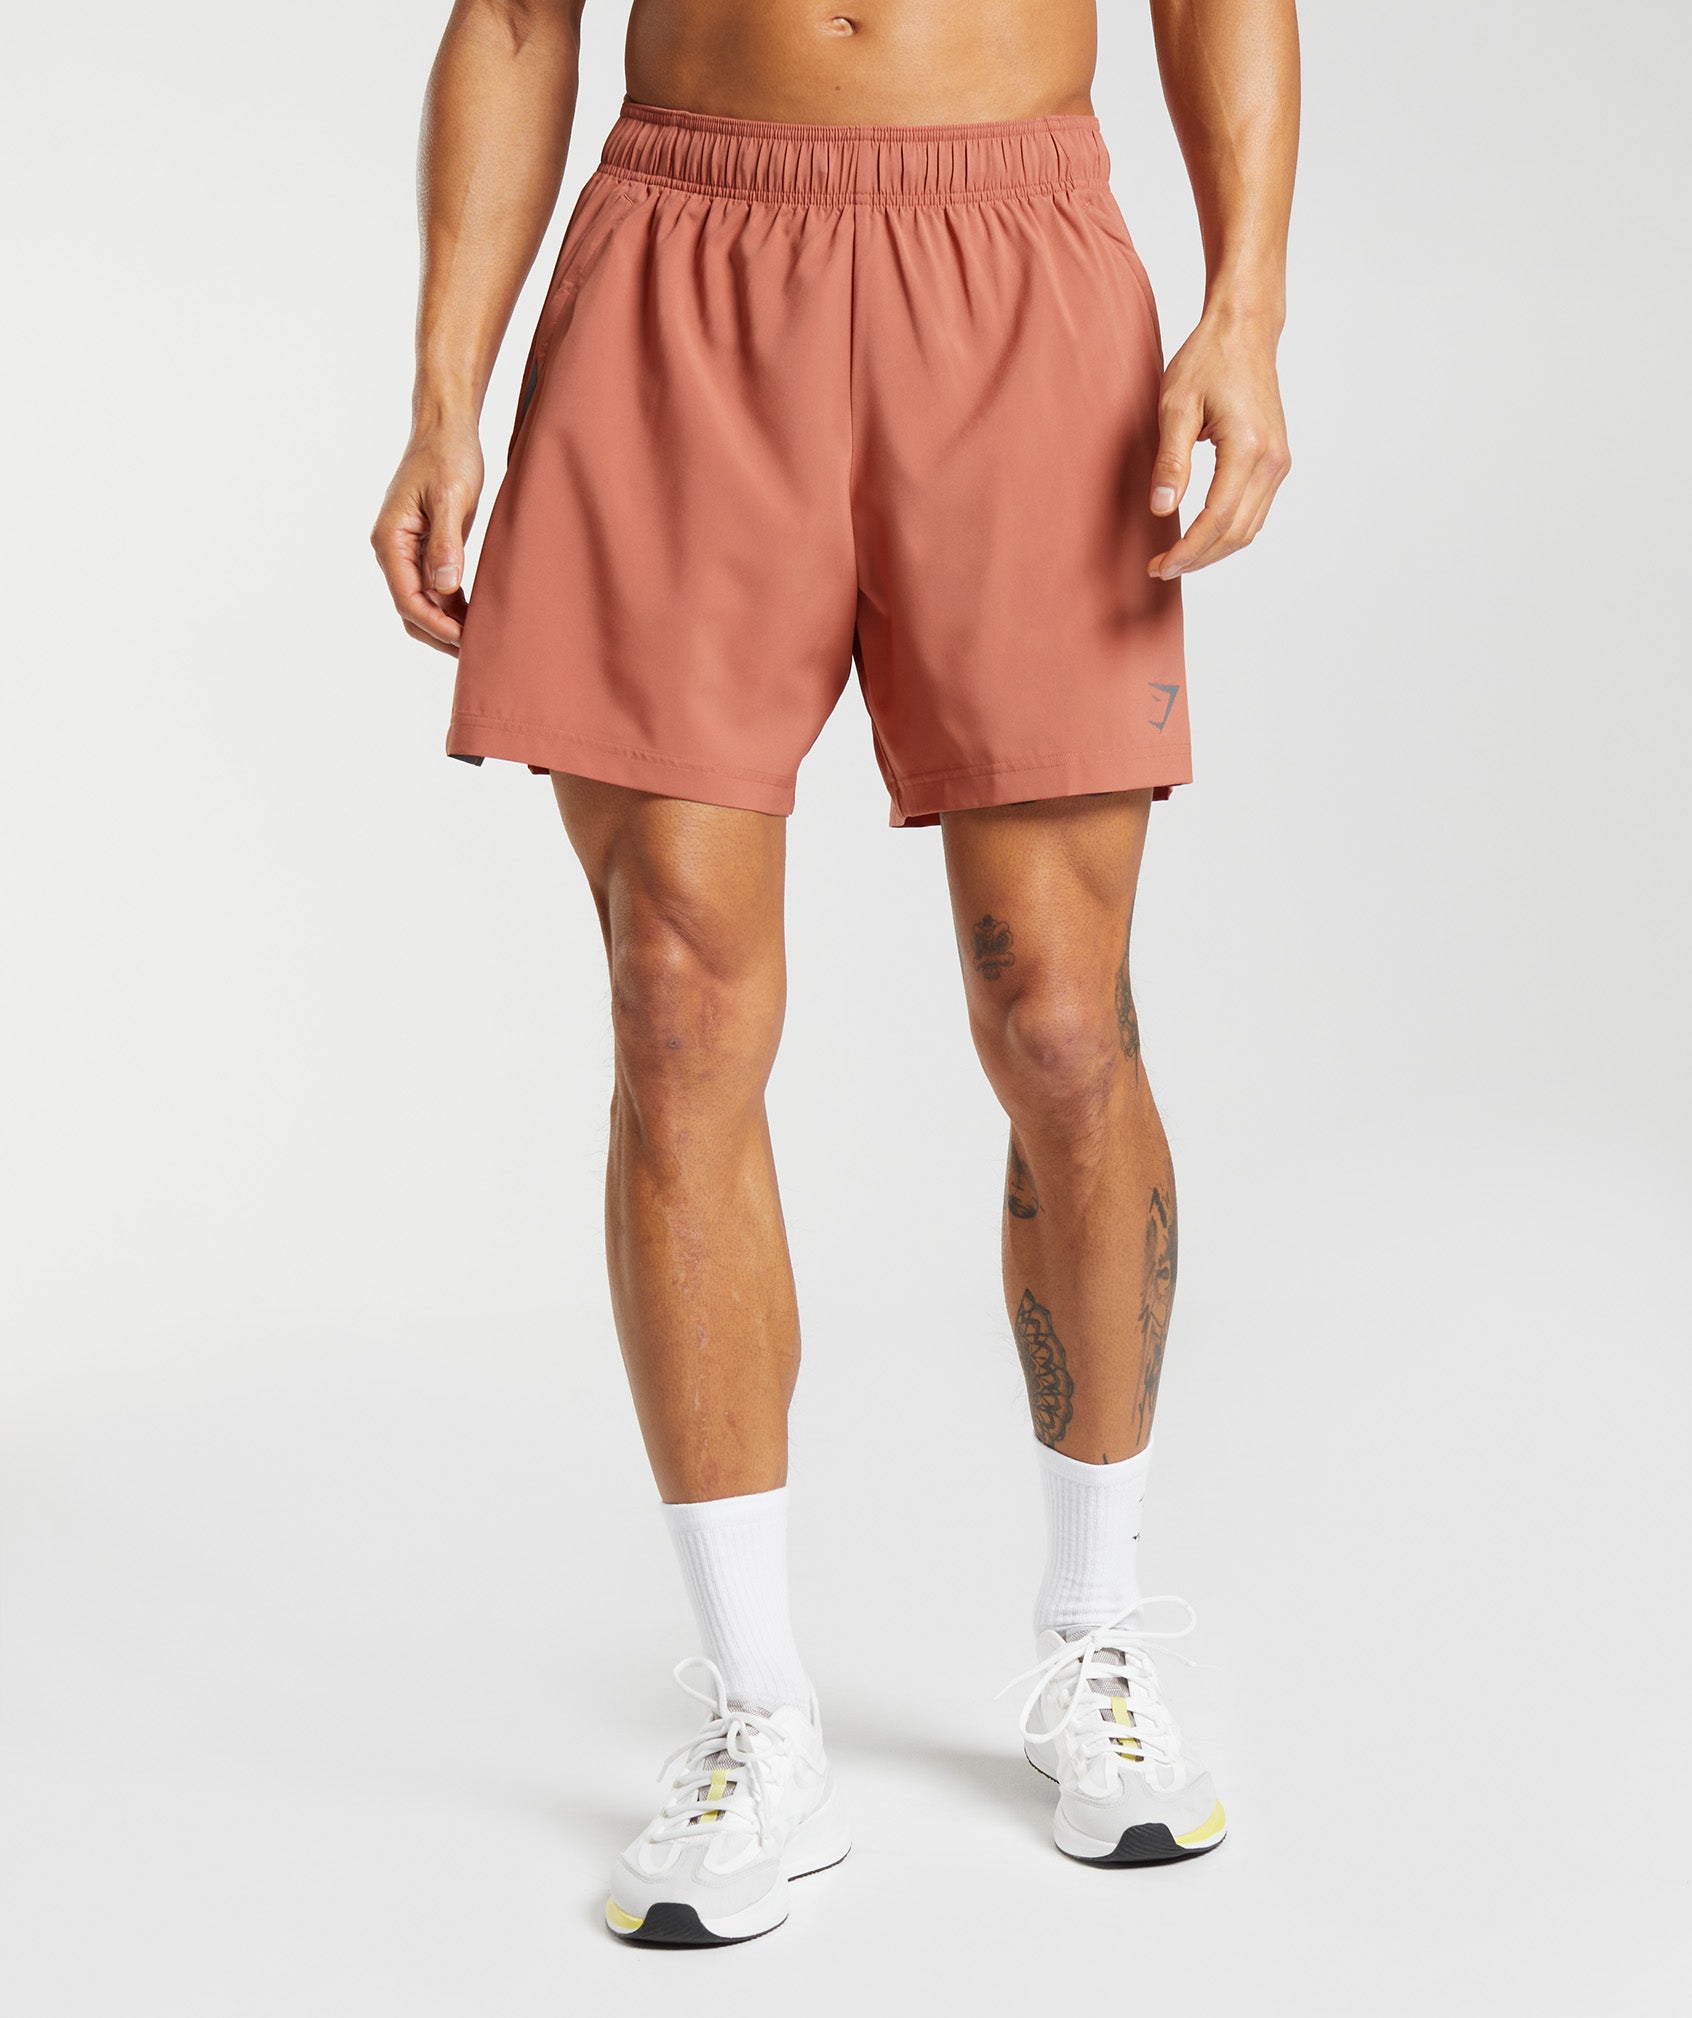 Sport 7" Shorts in Persimmon Red/Silhouette Grey